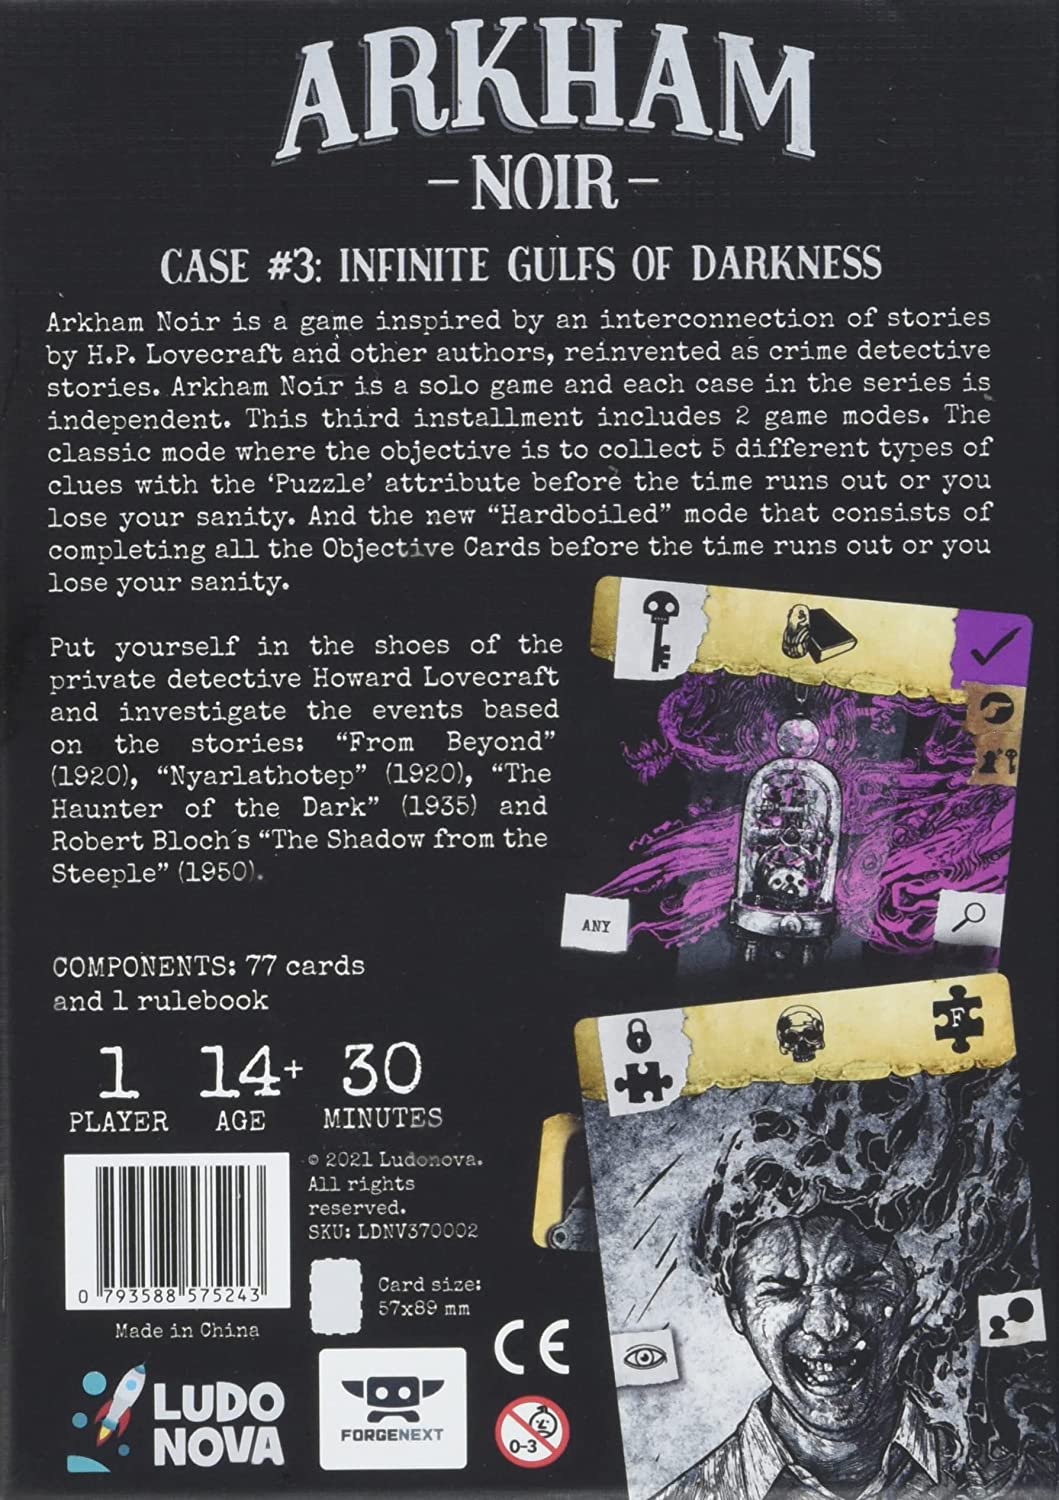 Arkham Noir 3 Infinite Gulfs Of Darkness A Solo Game By Yves Tourigny Inspired By The Stories Of H.P. Lovecraft